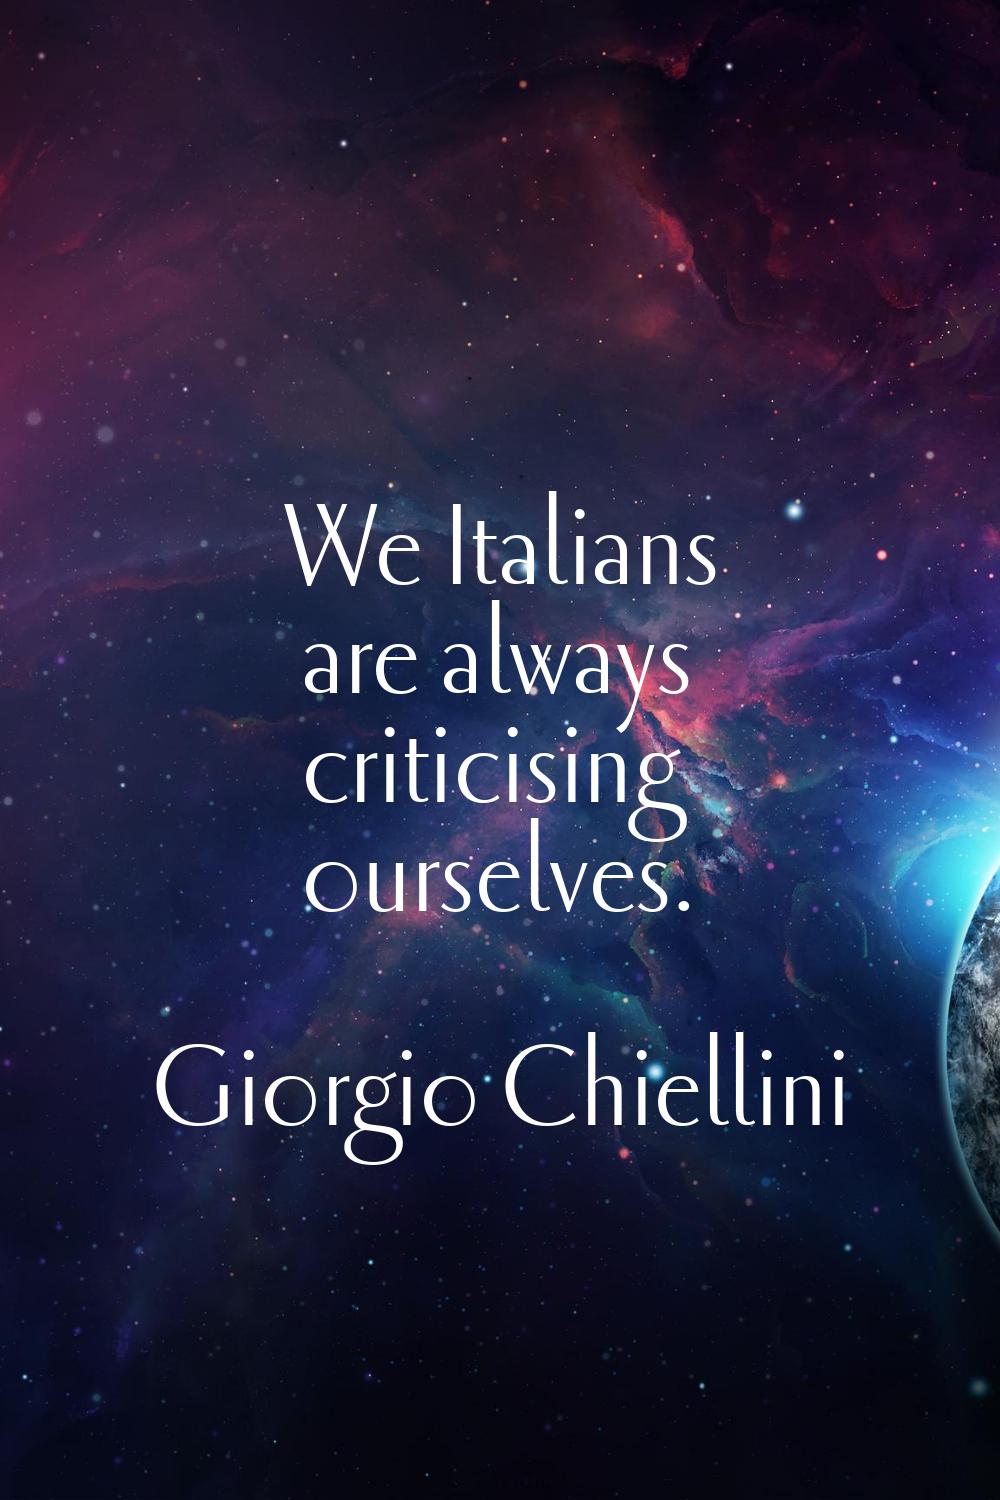 We Italians are always criticising ourselves.